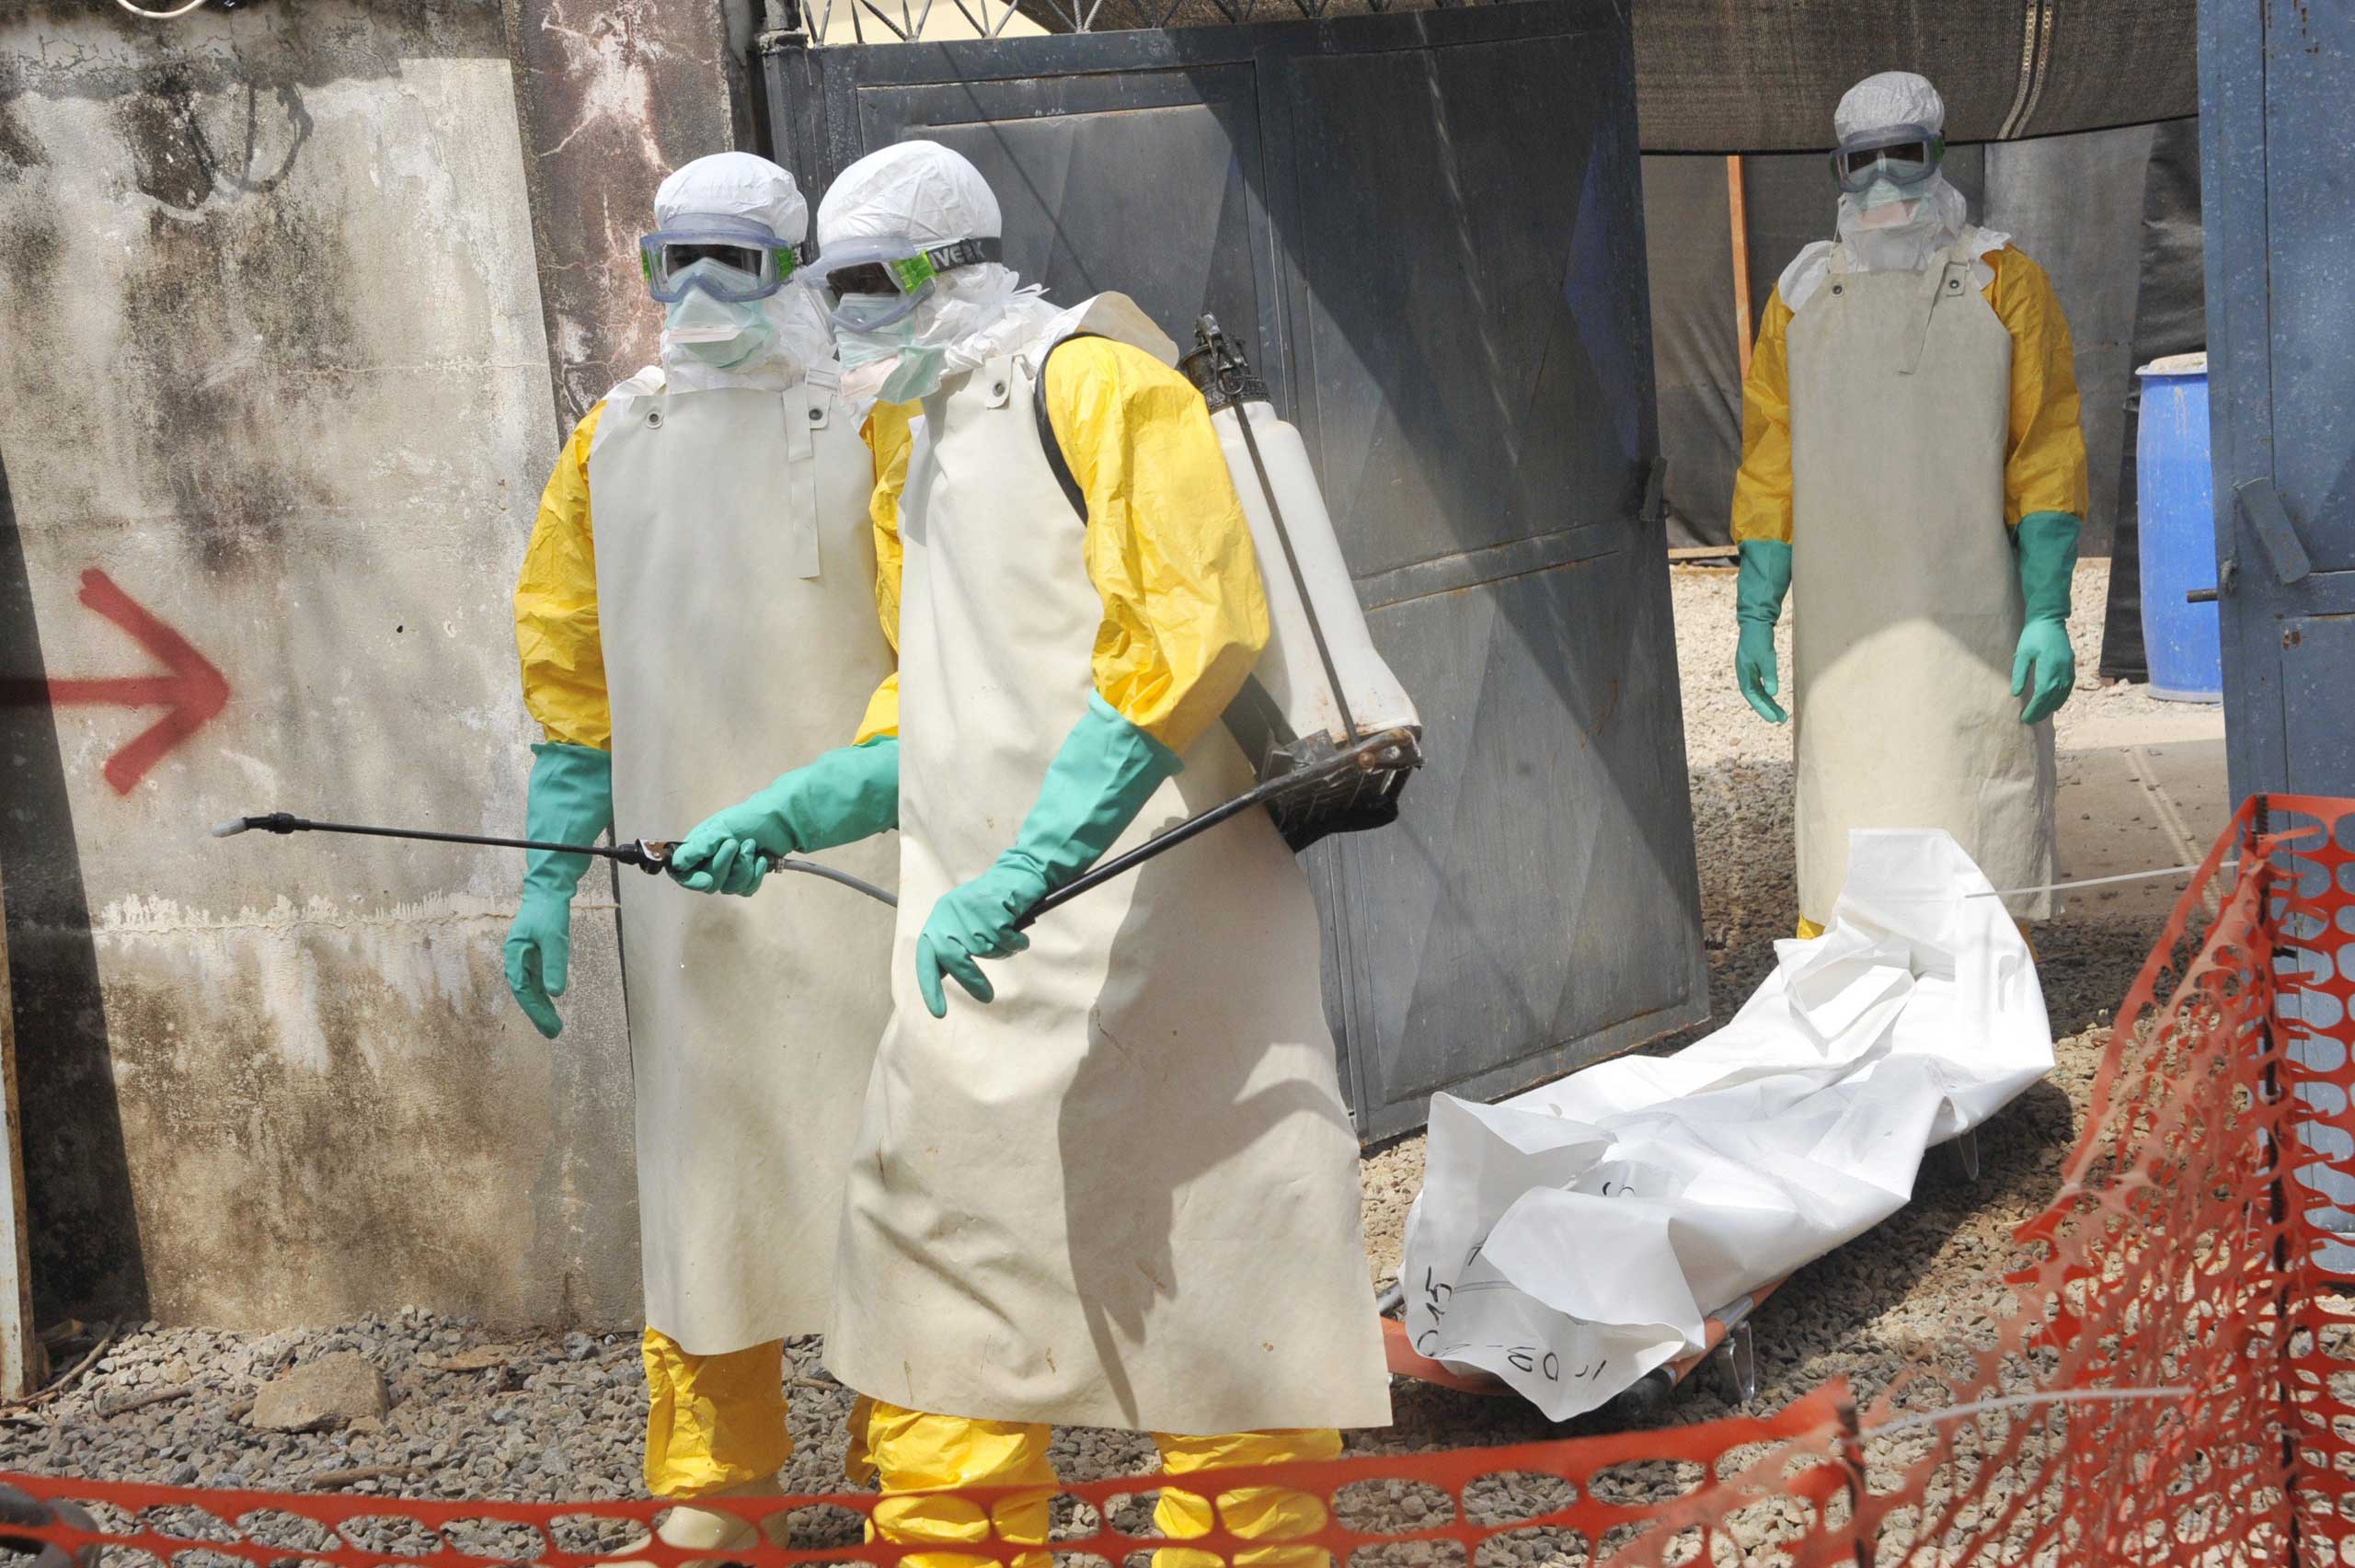 Members of the Guinean Red Cross move the body of a person who died from the Ebola virus on March 8, 2015 at the Donka hospital in Conakry. (Cellou Binani—AFP/Getty Images)